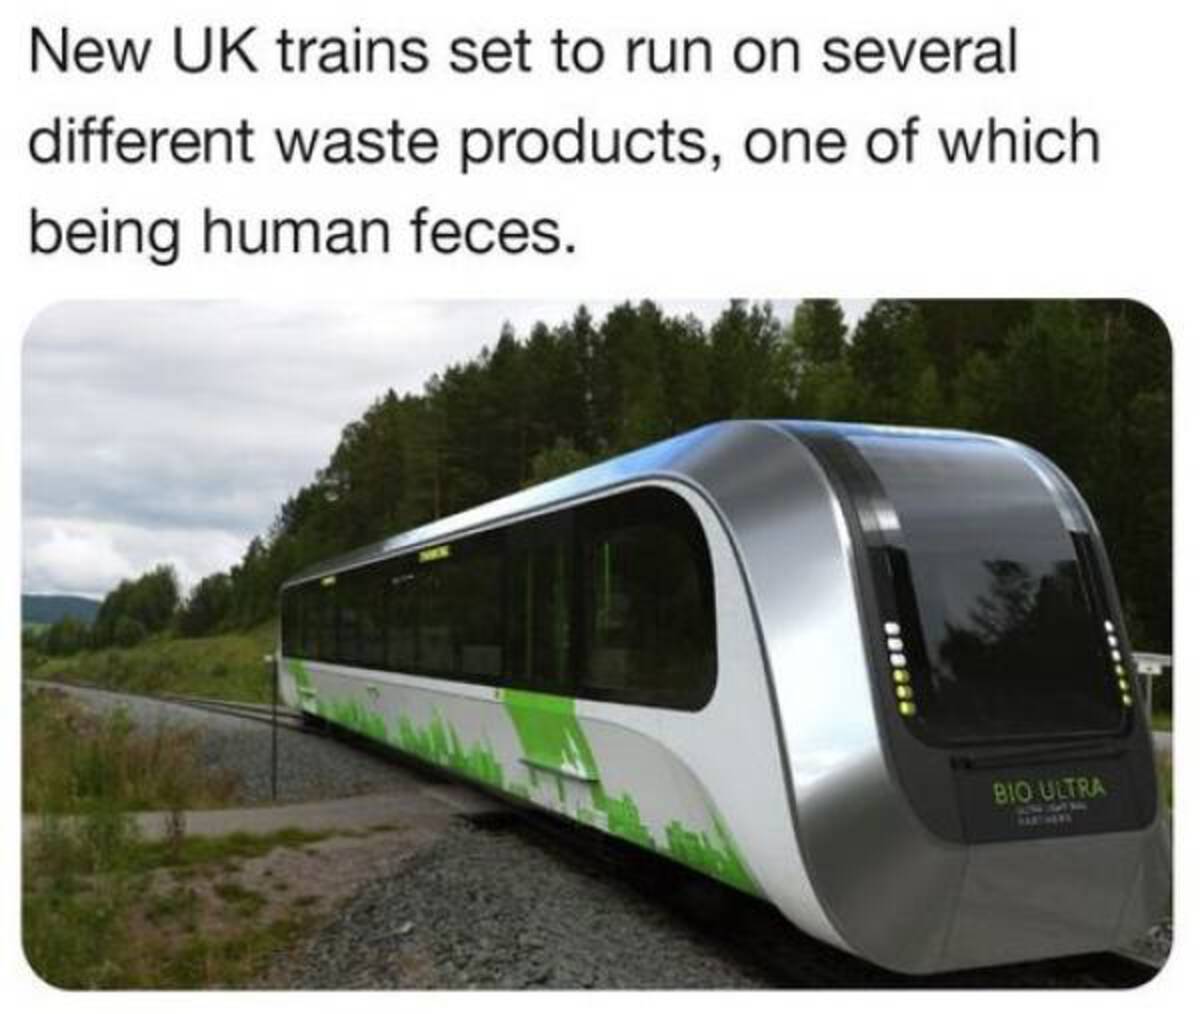 sustainable trains - New Uk trains set to run on several different waste products, one of which being human feces. Bio Ultra